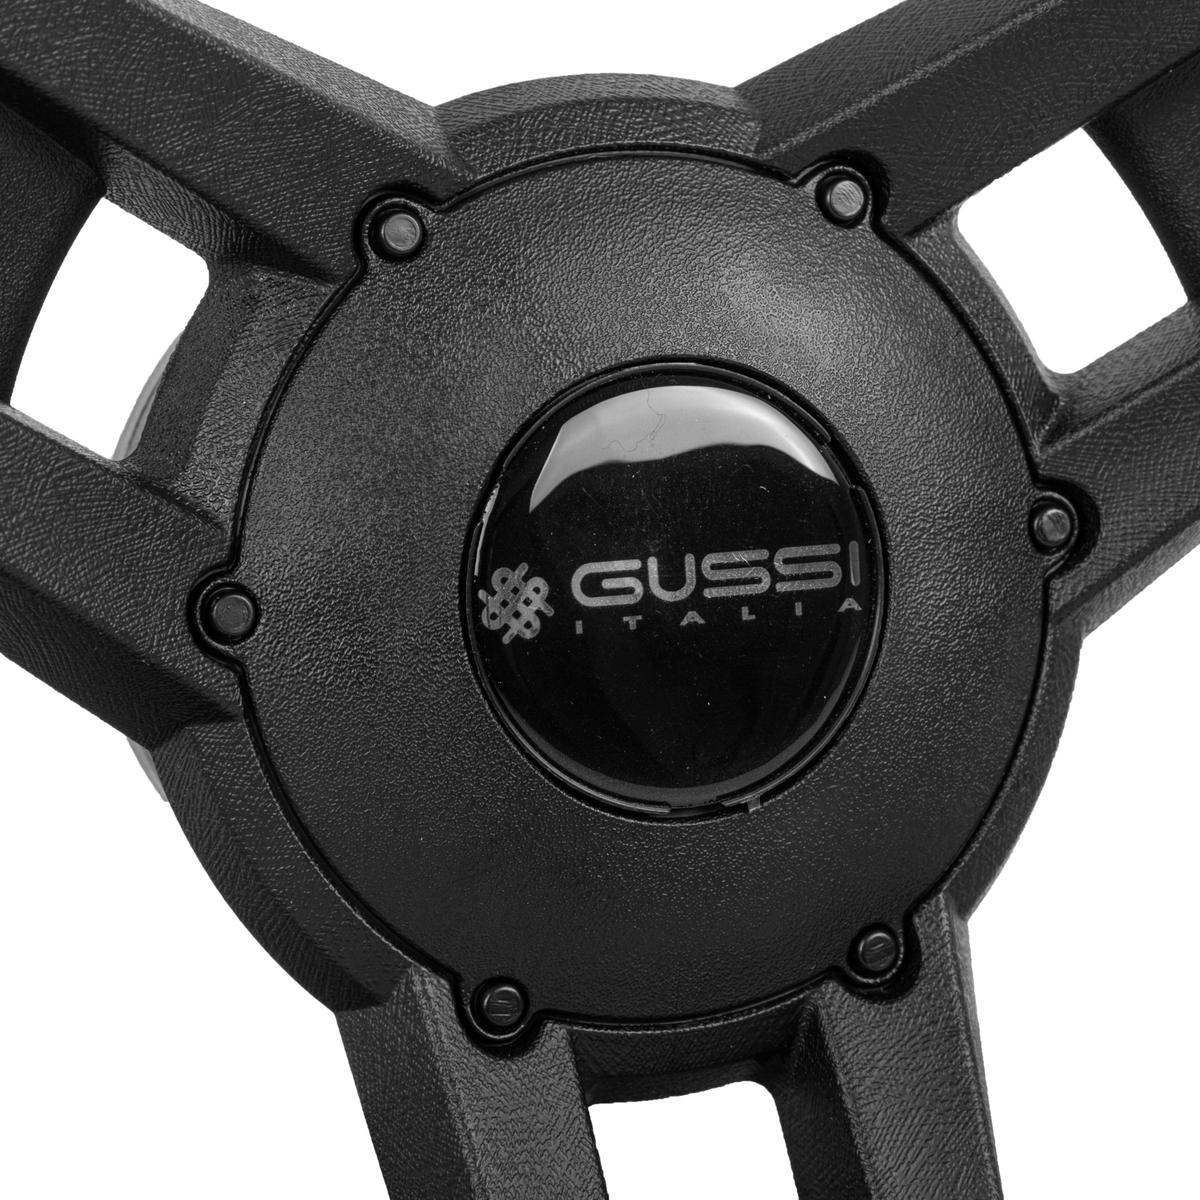 Gussi Italia® Giazza Black Steering Wheel Compatible with ICON Golf Car Models & AEV Golf Car Models